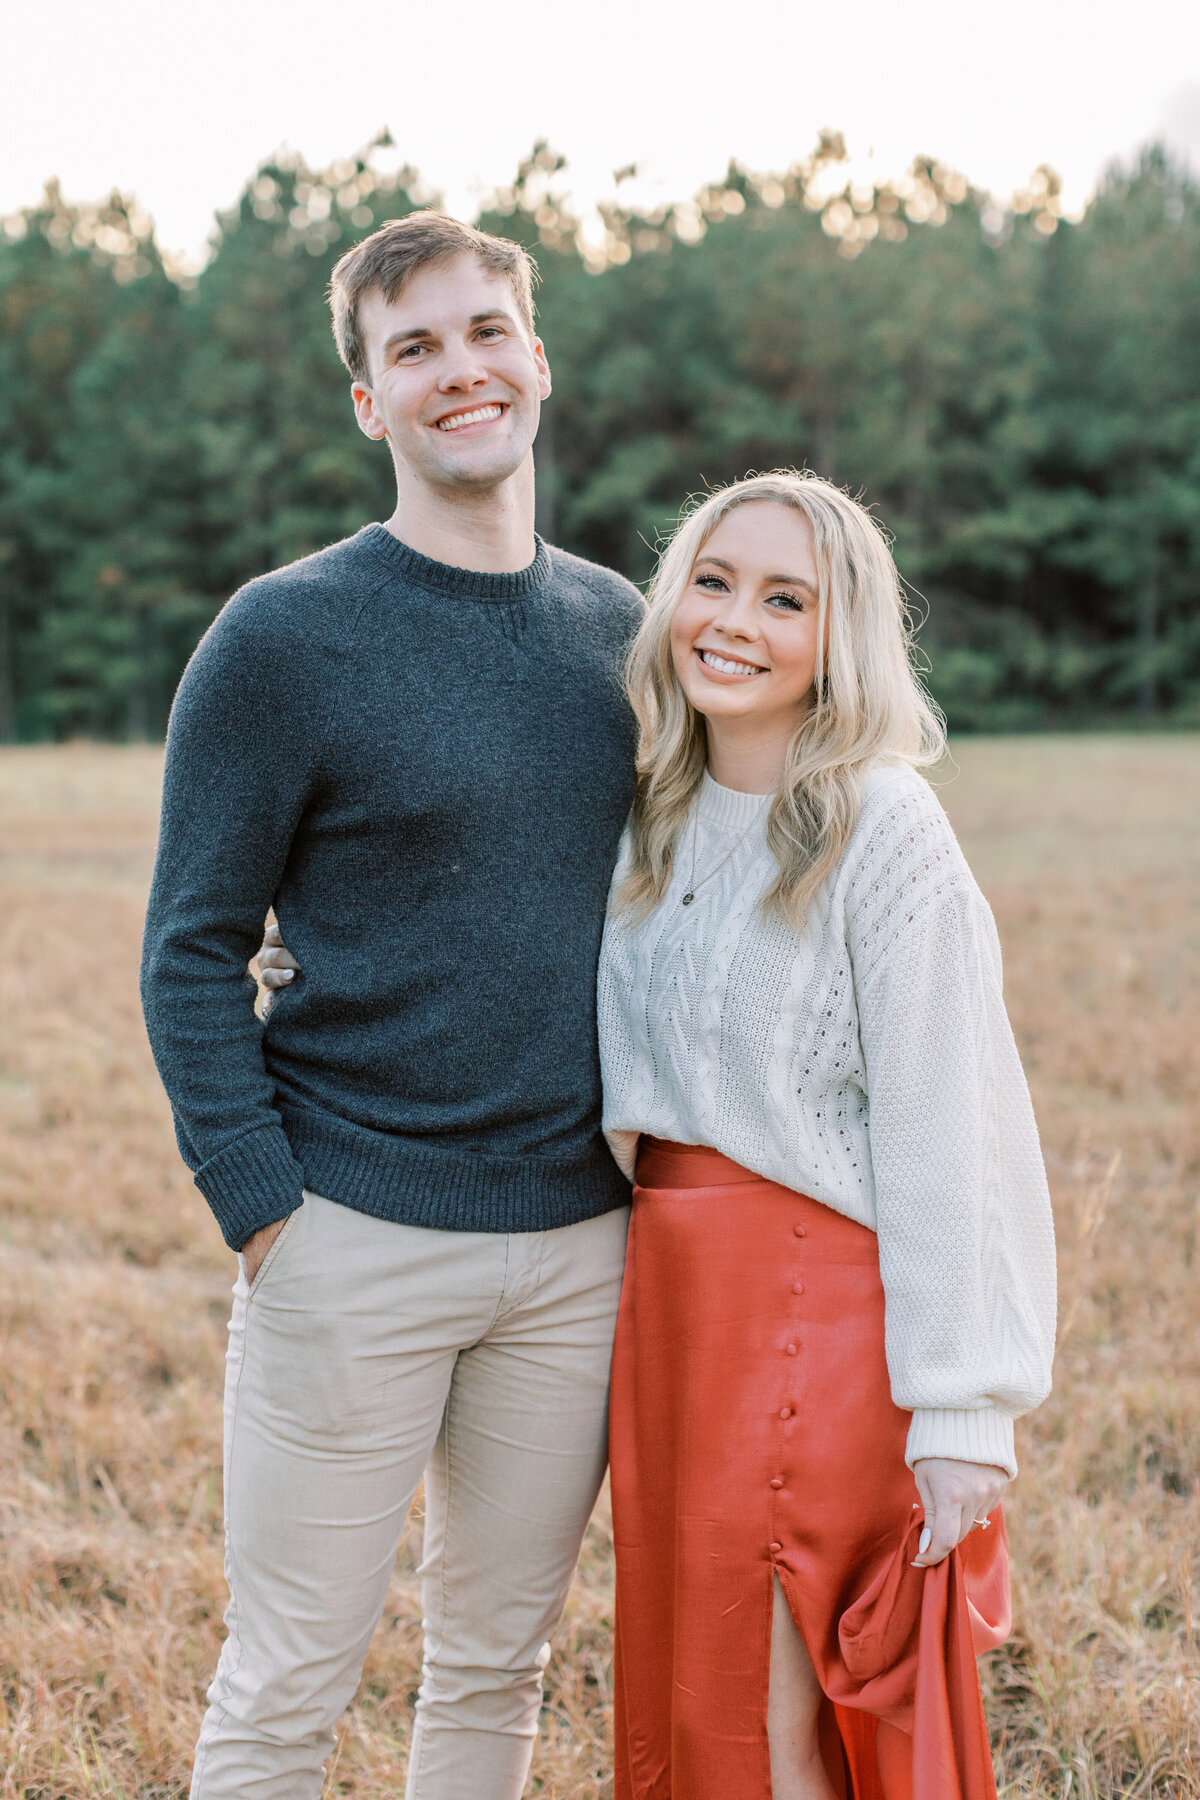 A couple smiles big while standing in a field surrounded by pine trees.